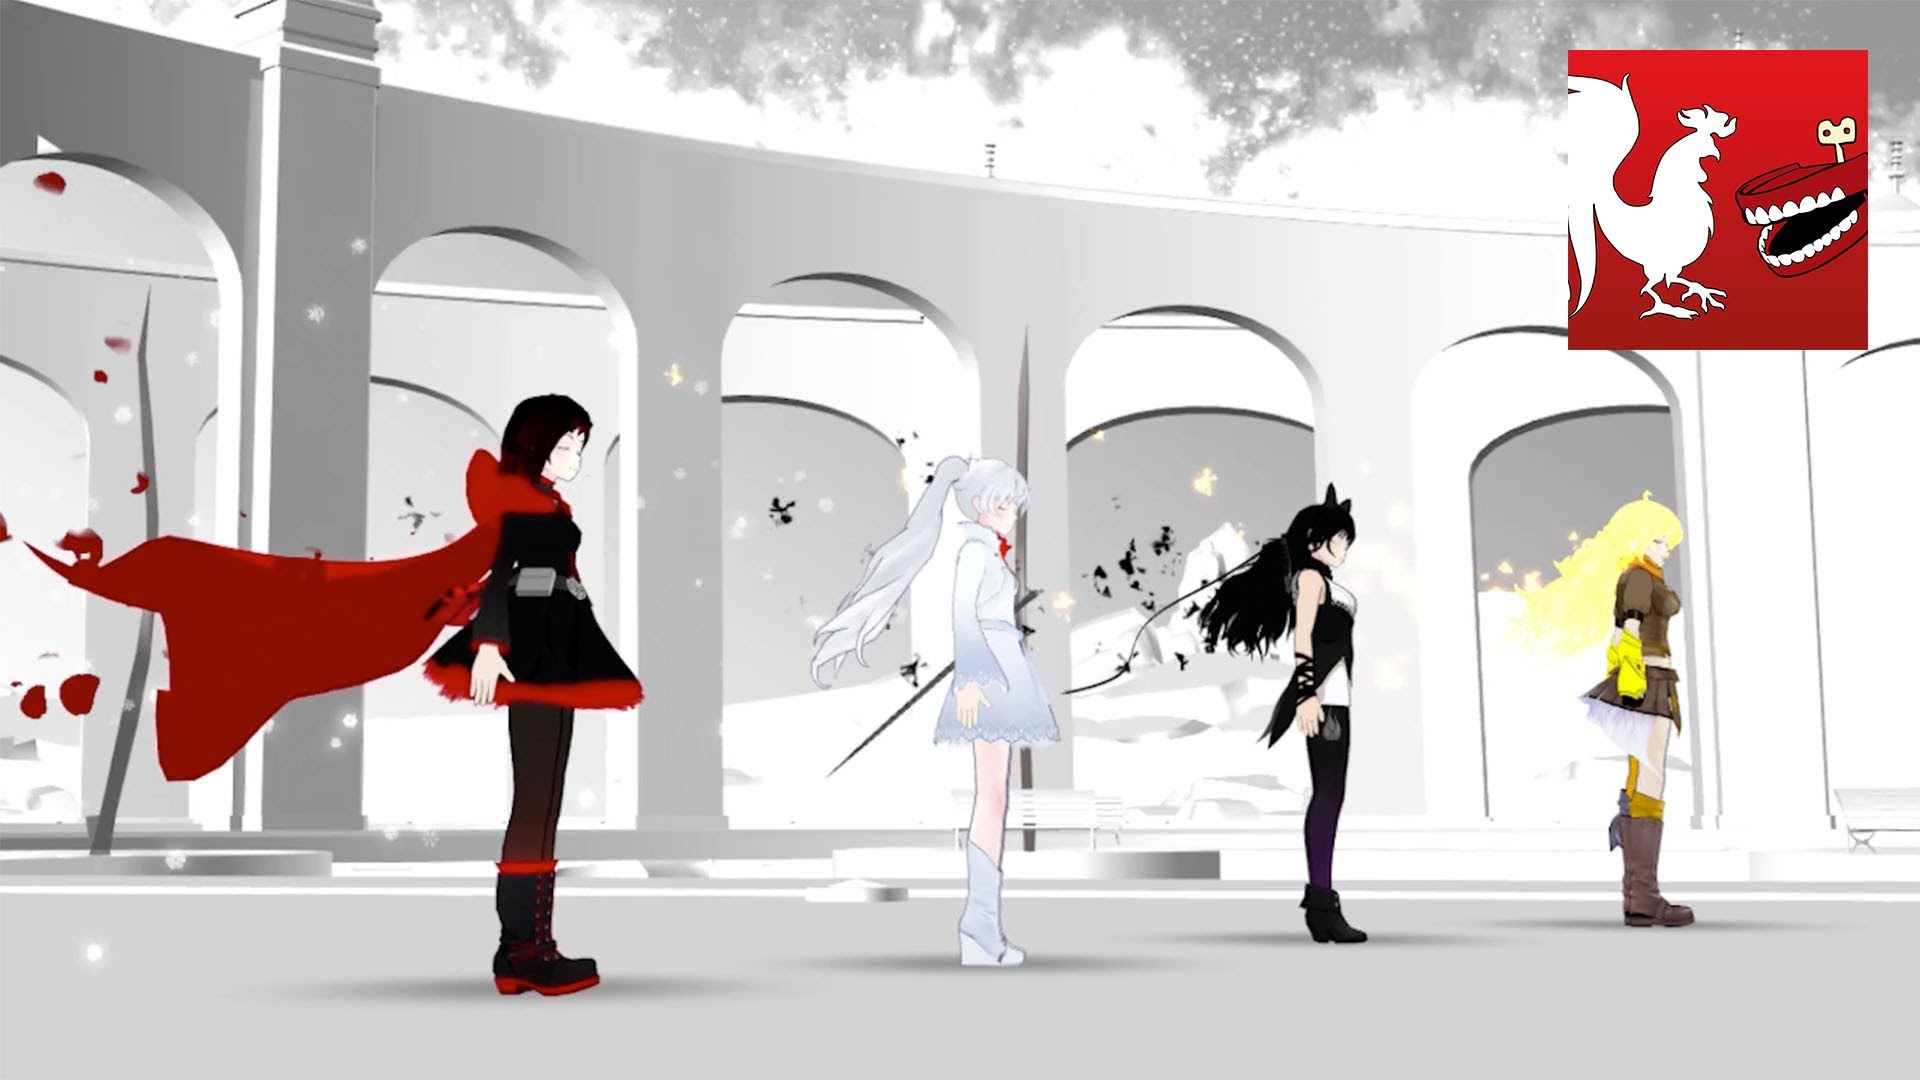 Rwby season 2, chapter 1- “best day ever”